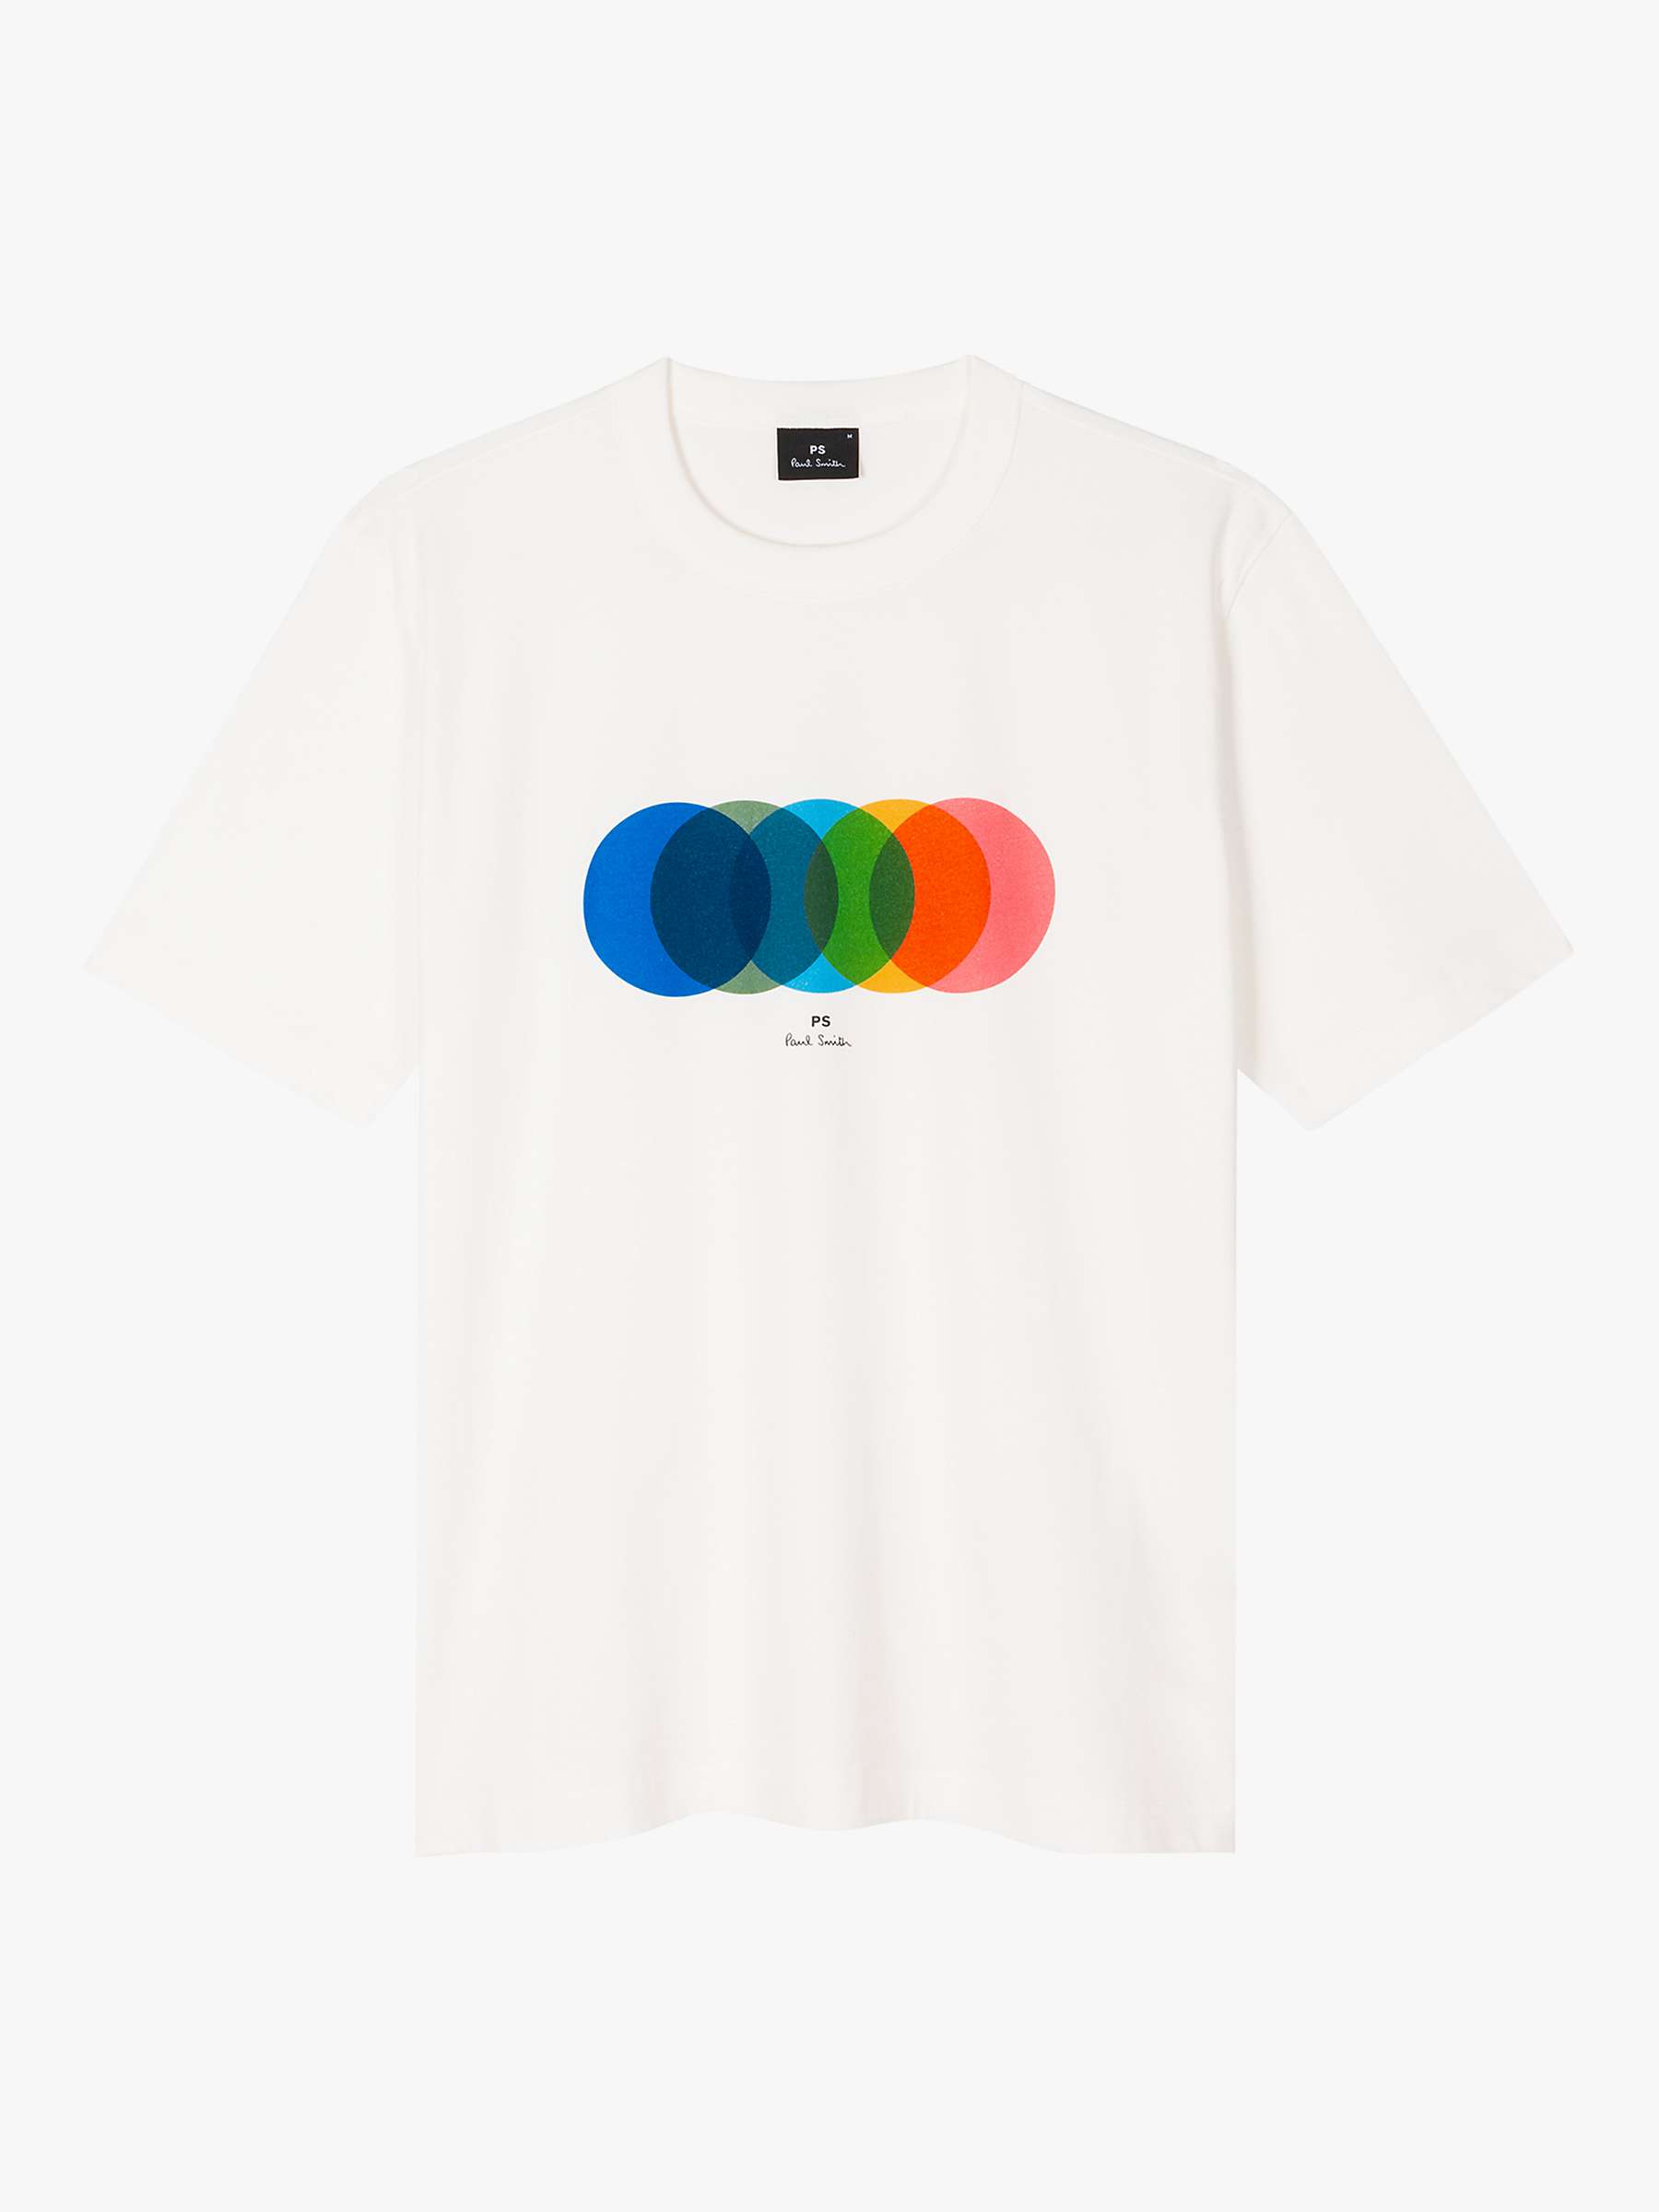 Buy PS Paul Smith Short Sleeve Circles T-Shirt, White/Multi Online at johnlewis.com